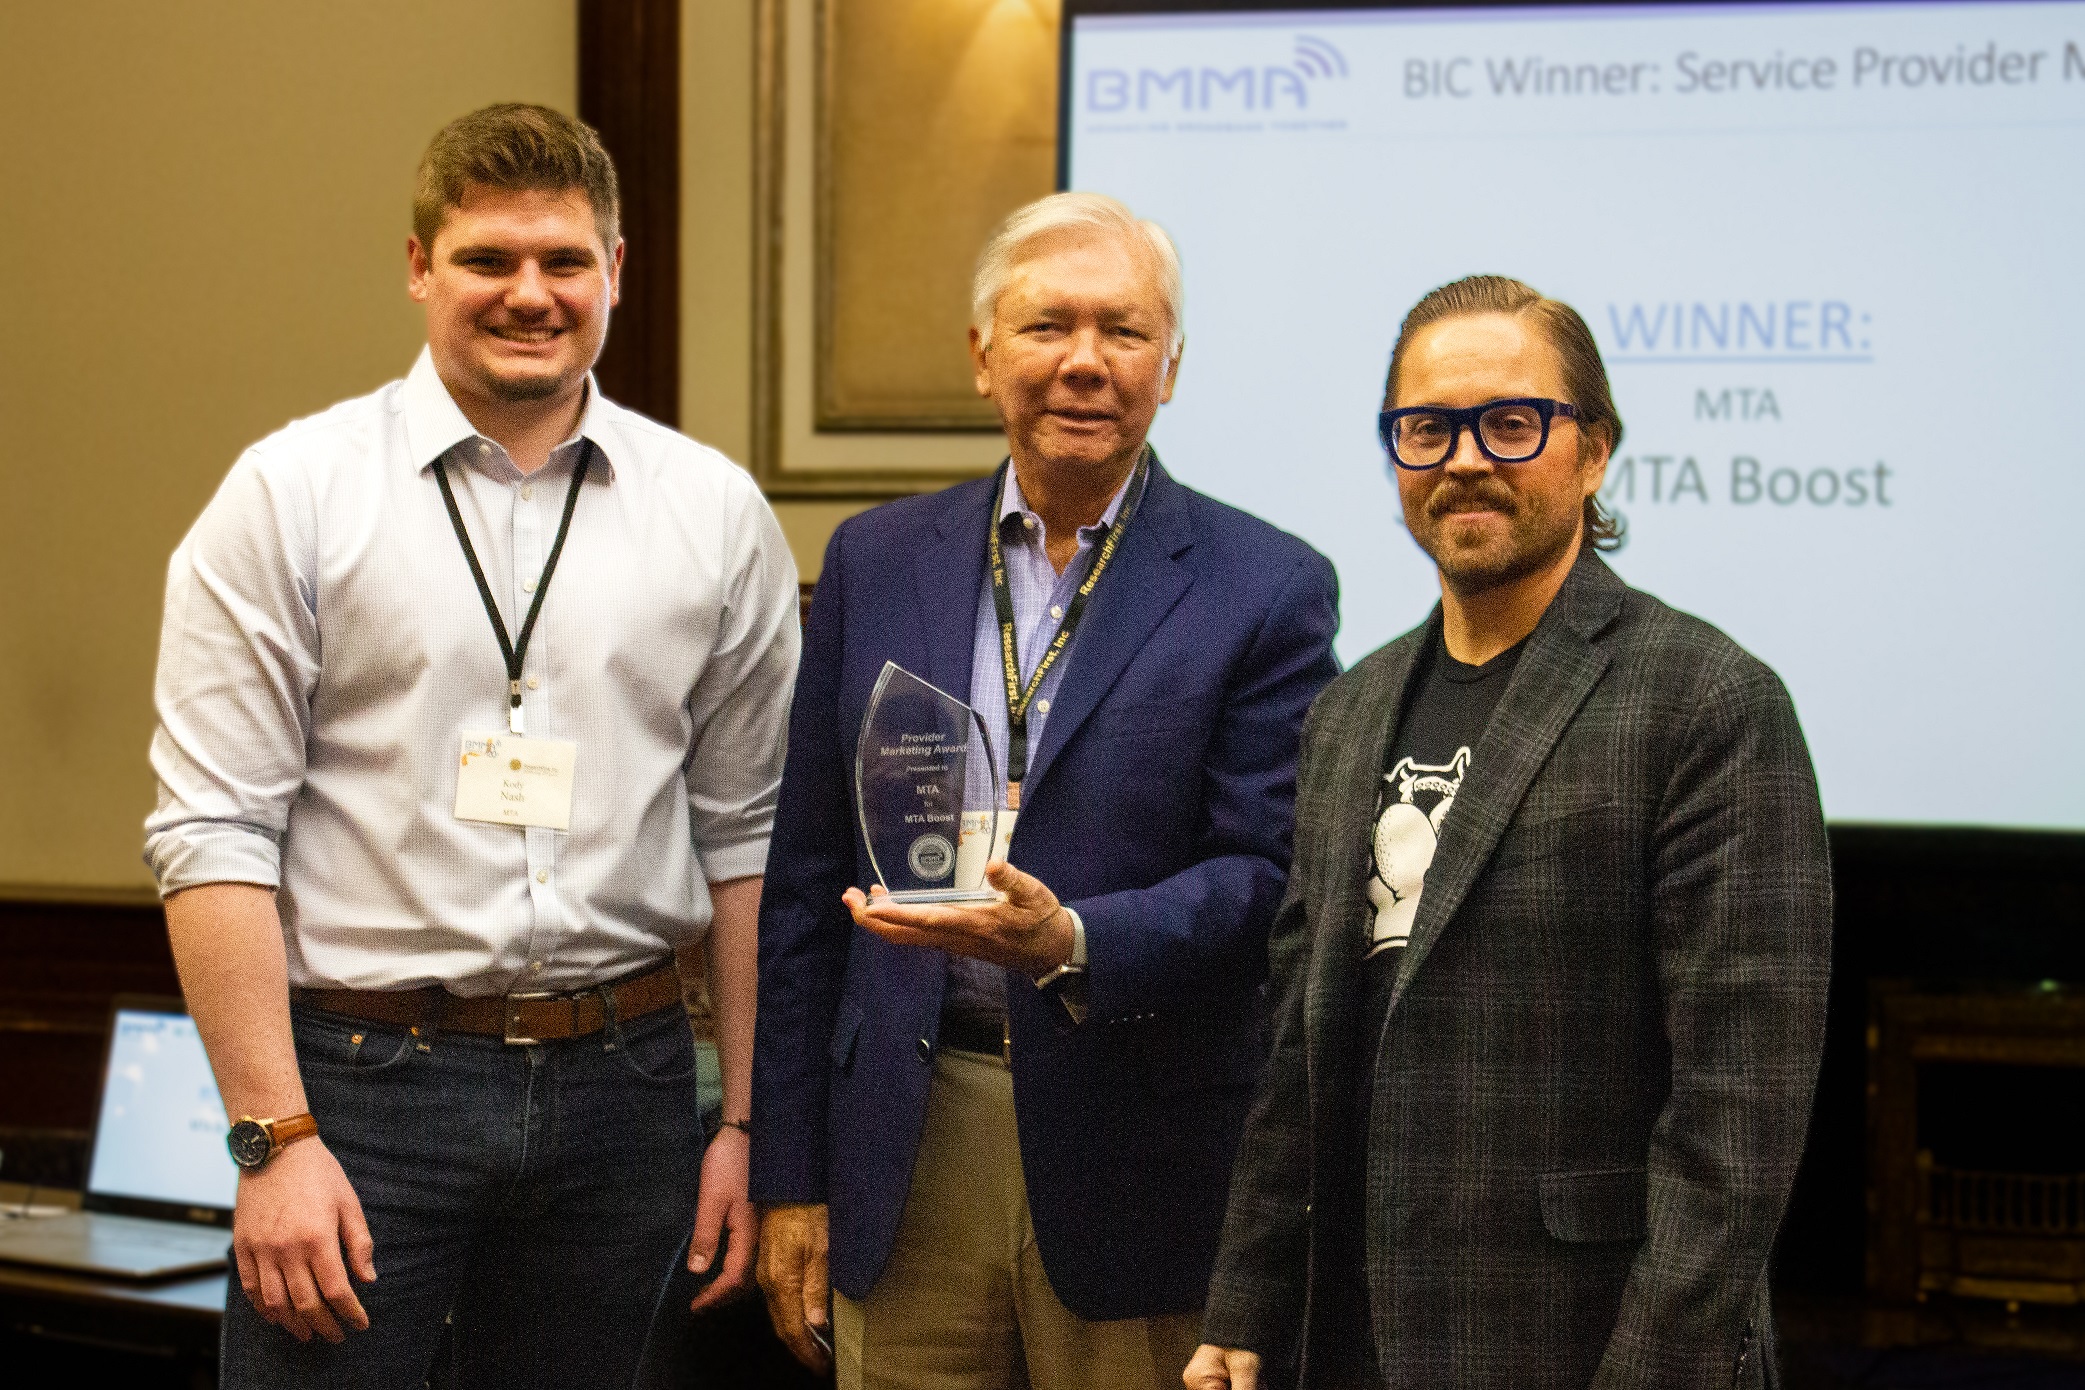 Kody Nash, Product Specialist (left) & Jonathan Babbitt, Vice President of Product Strategy & Communications of MTA (right) accept the Service Provider Award from Ellis Hill, President of RFI (center)